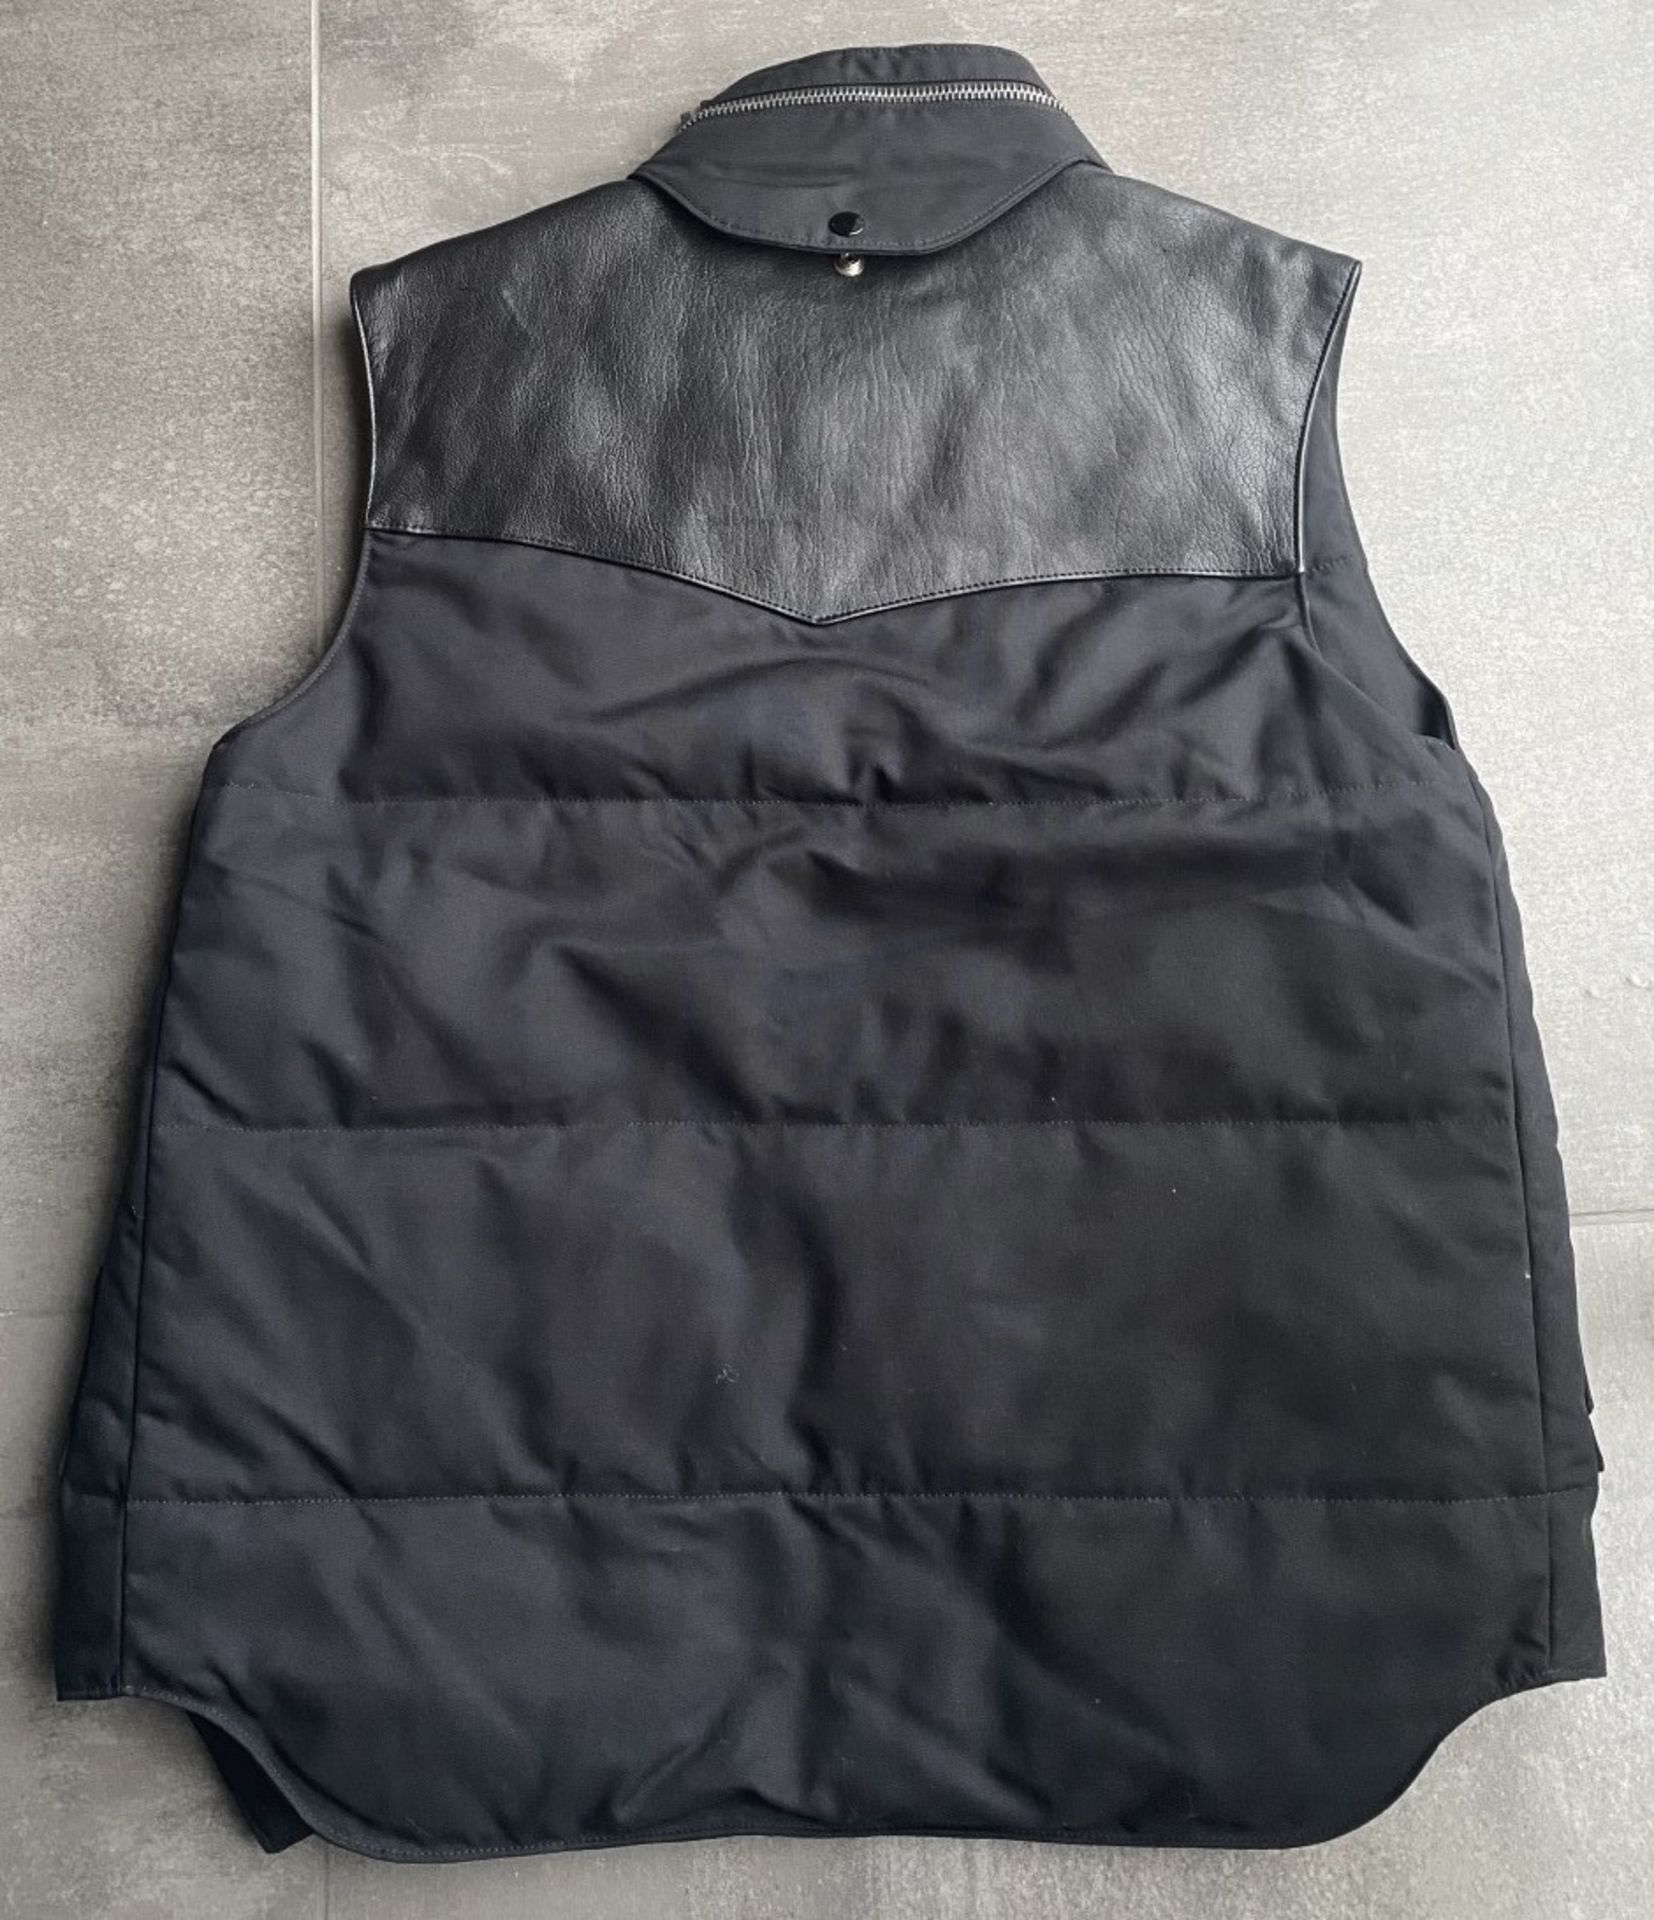 1 x Men's Genuine Yves Saint Laurant Gillet / Body Warmer In Black With Leather Panelling - Image 3 of 8